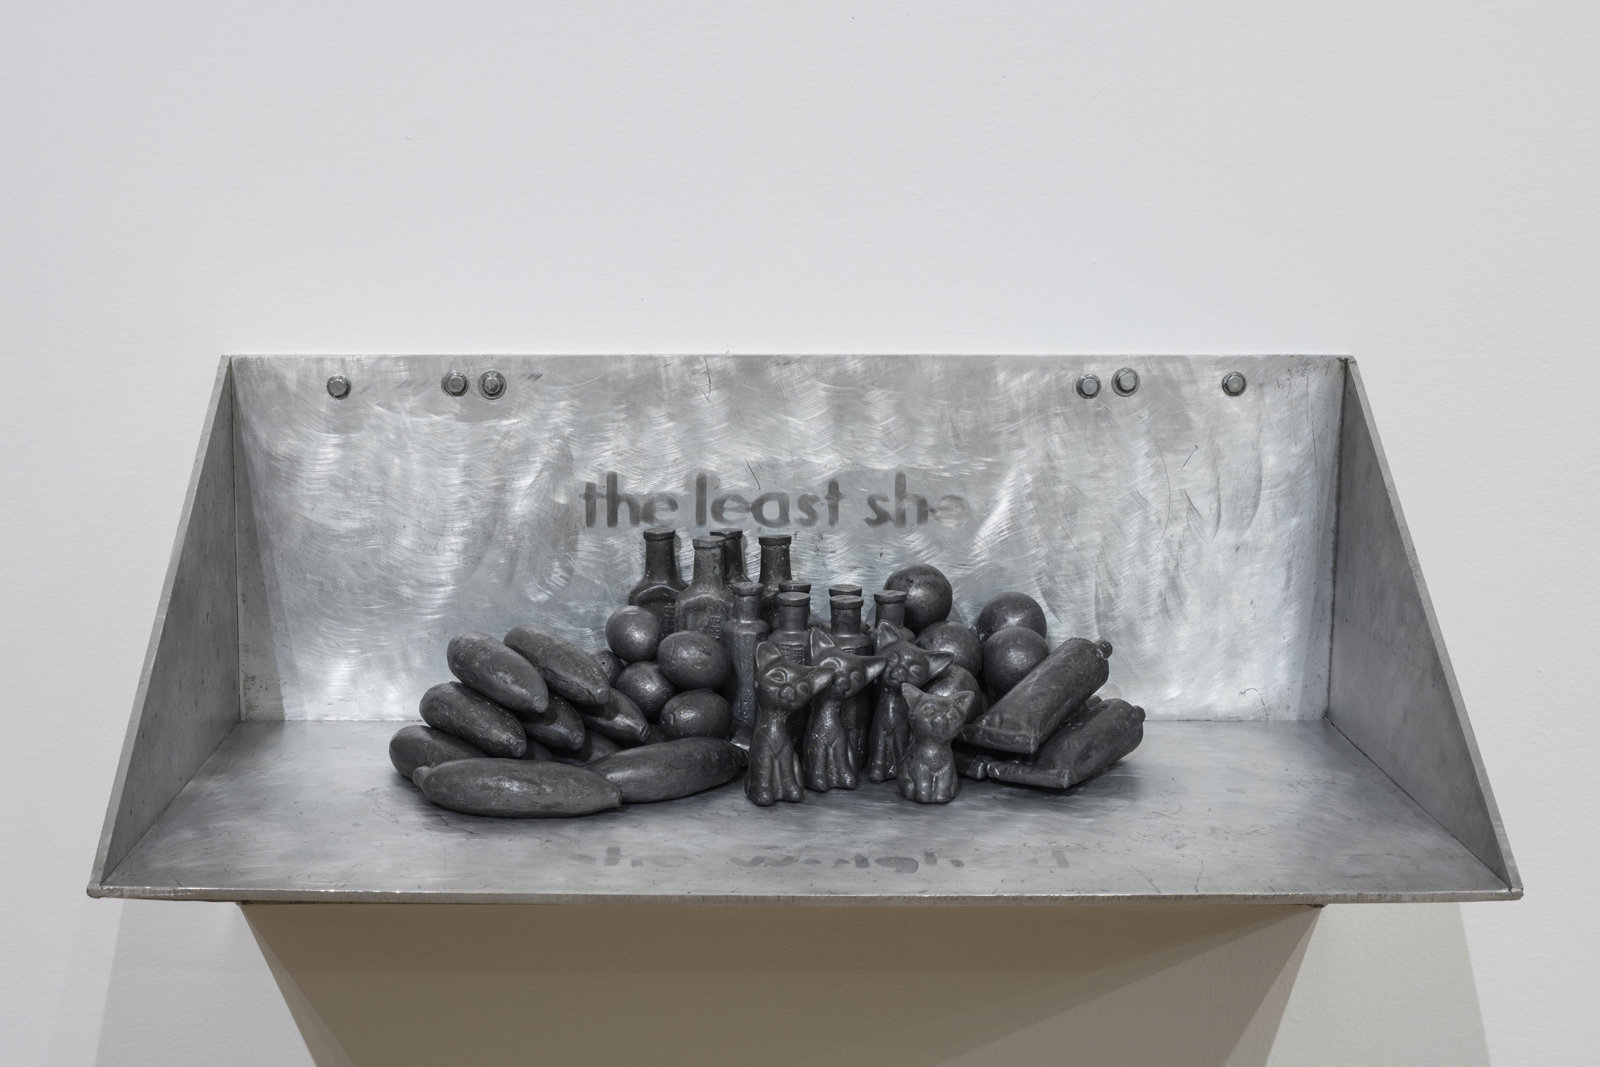 Liz Magor, The Most She Weighed / The Least She Weighed, 1982, lead, aluminum, 15 x 30 x 15 in. (38 x 77 x 38 cm), 12 x 24 x 12 in. (31 x 62 x 31 cm)